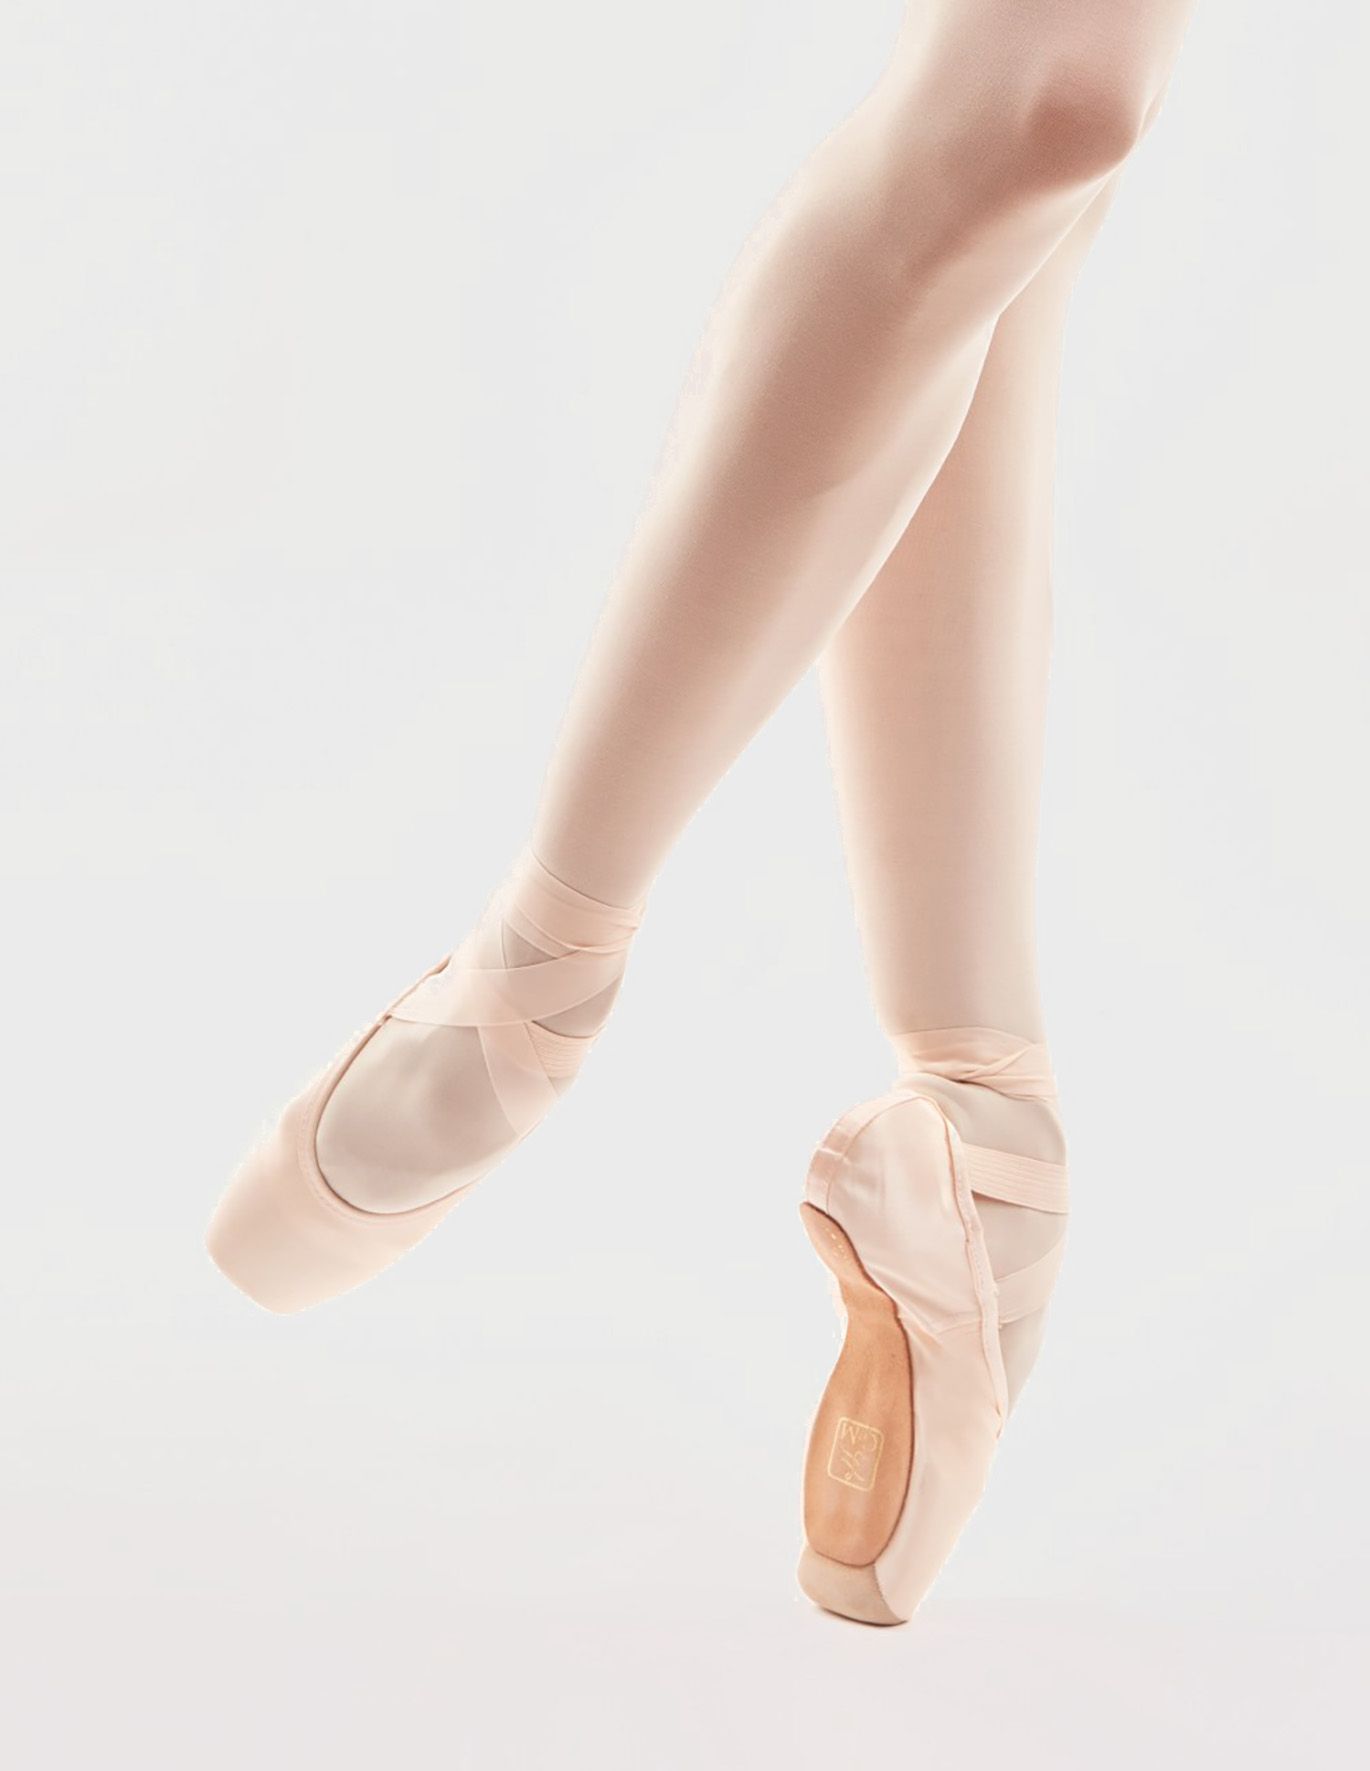 Gaynor Minden Hard Classic Fit Box 5 Pointe Shoe